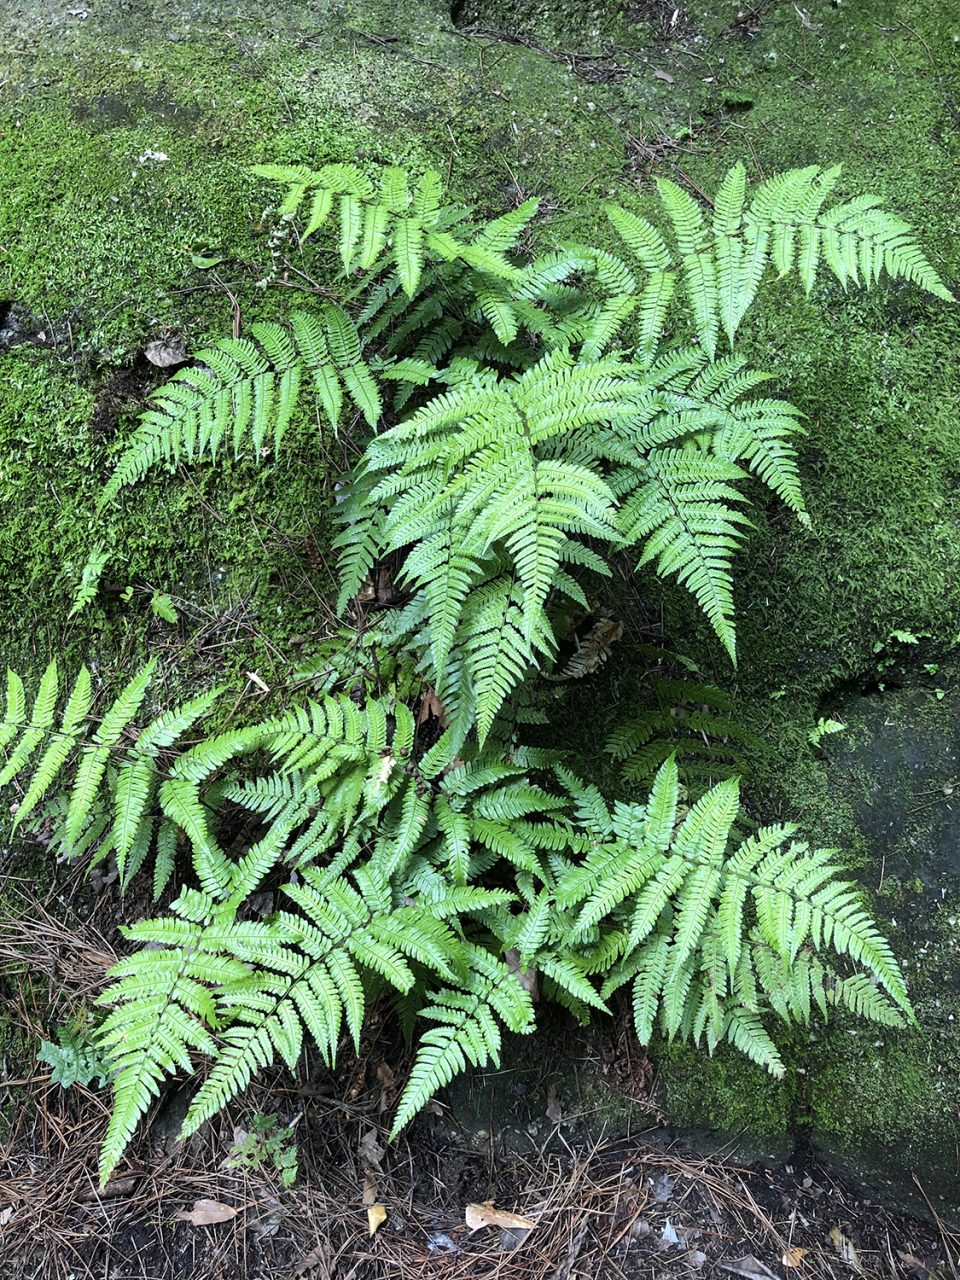 Ferns growing in the shade of the forest. Copyright Keith Dotson, 2019.